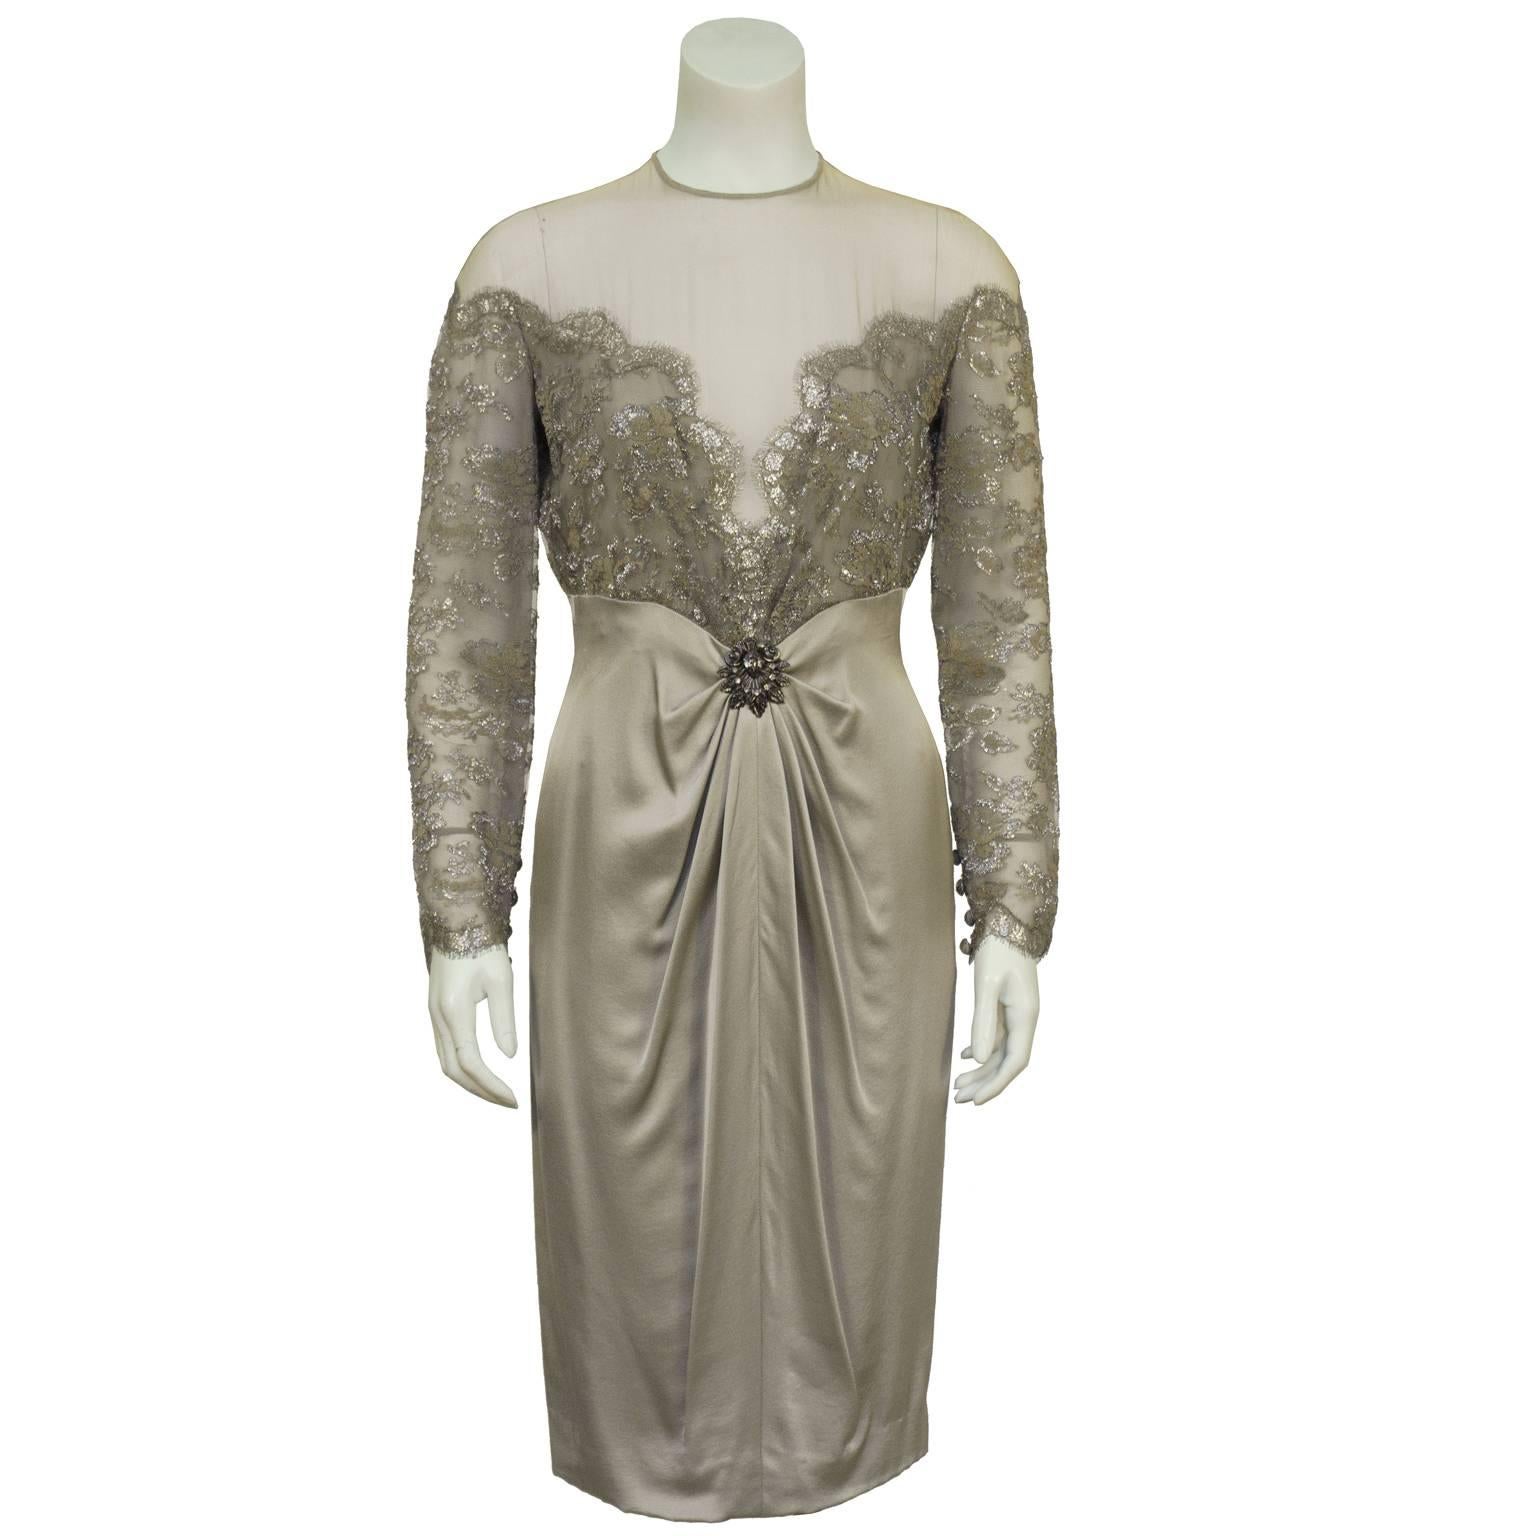 1980's unworn silver lace and taupe satin cocktail dress with illusion neckline by Jean Louis Scherrer. French couturier known for his elegant designs. Upper bodice in silver lace that finishes below the bosom with a subtle V and gathers to a sewn